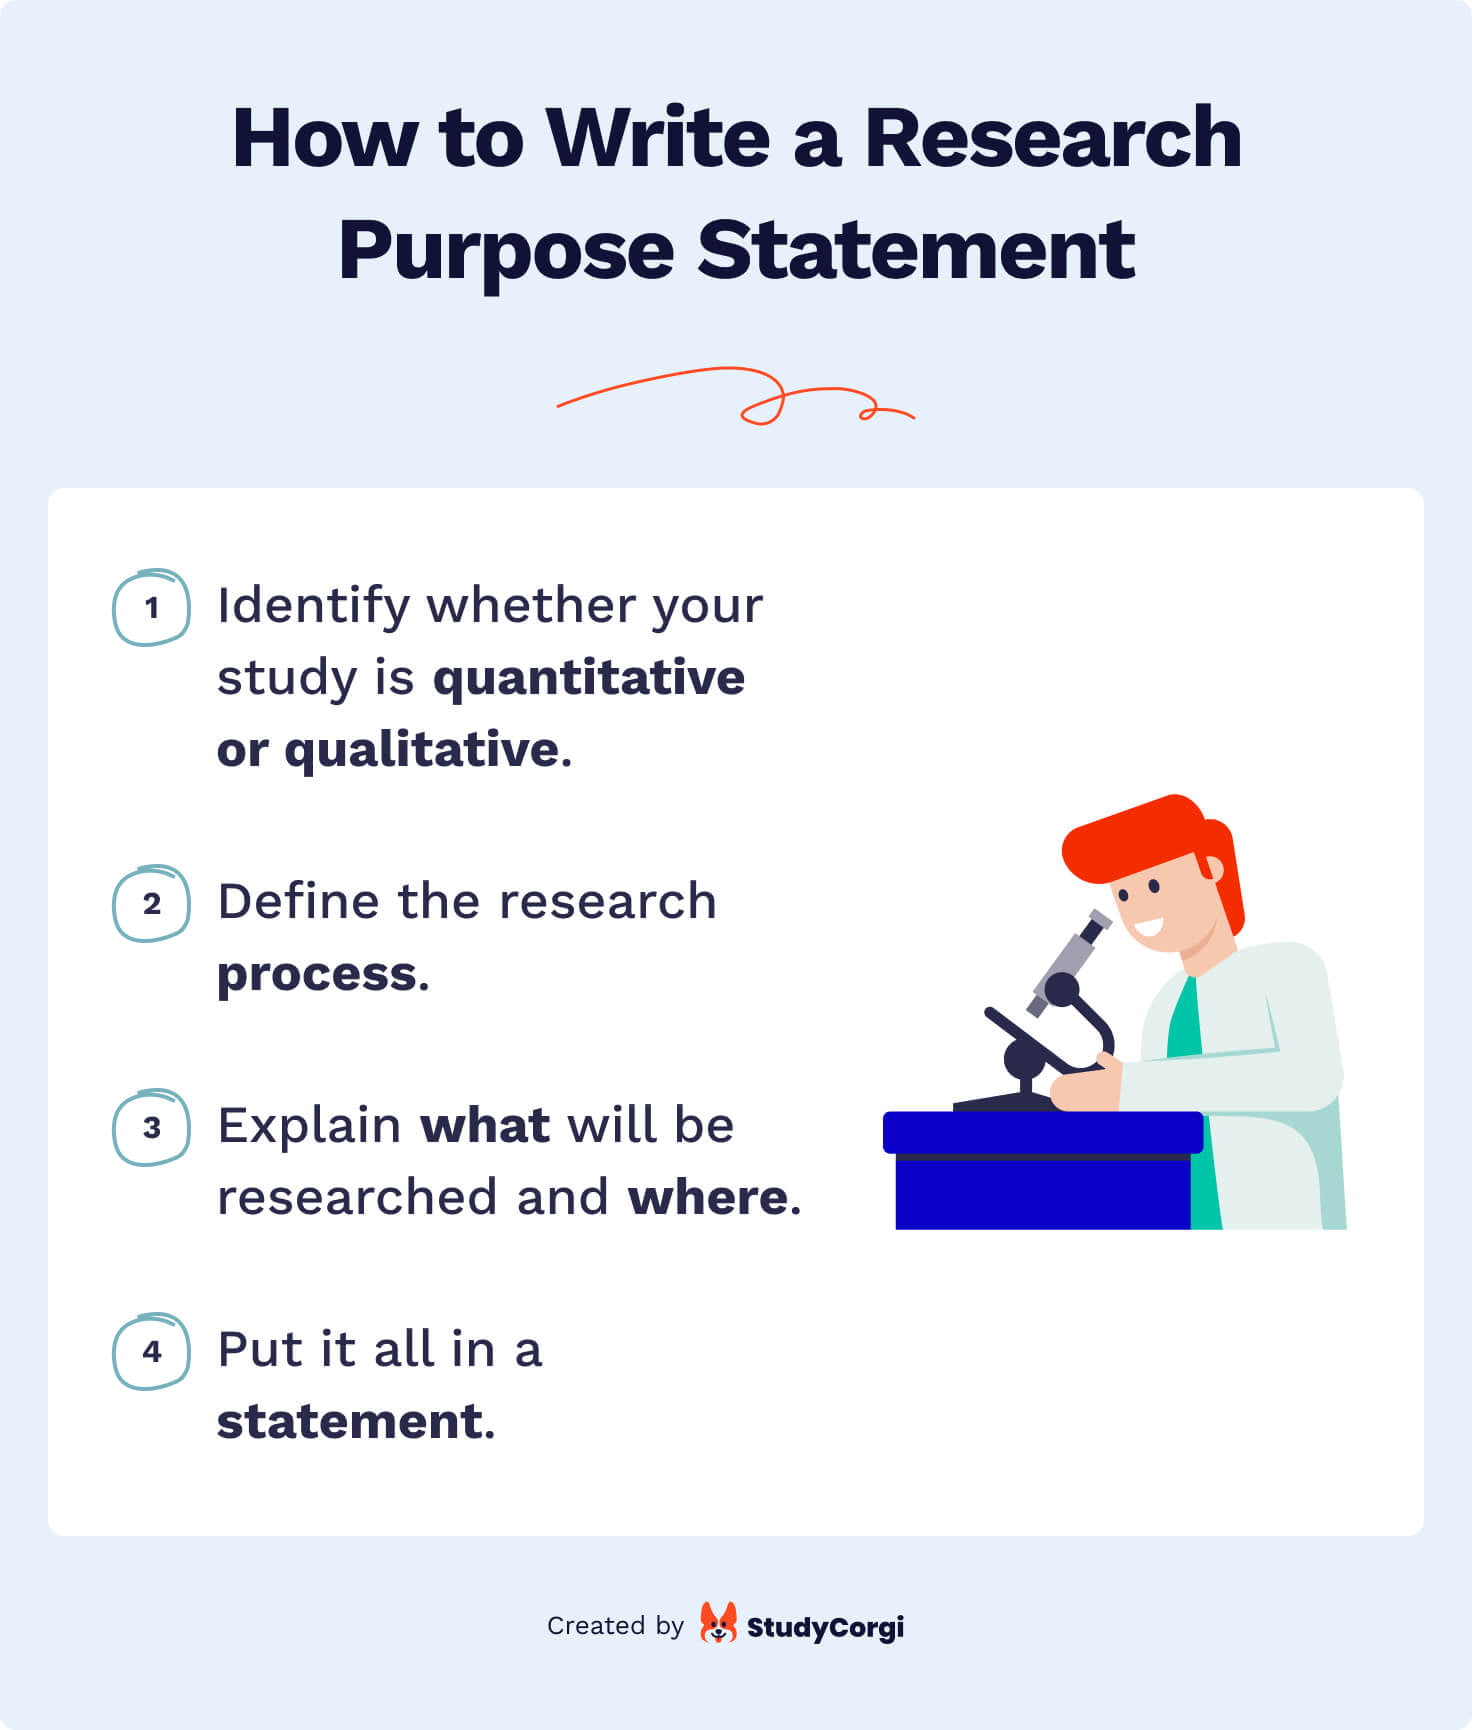 the research purpose of